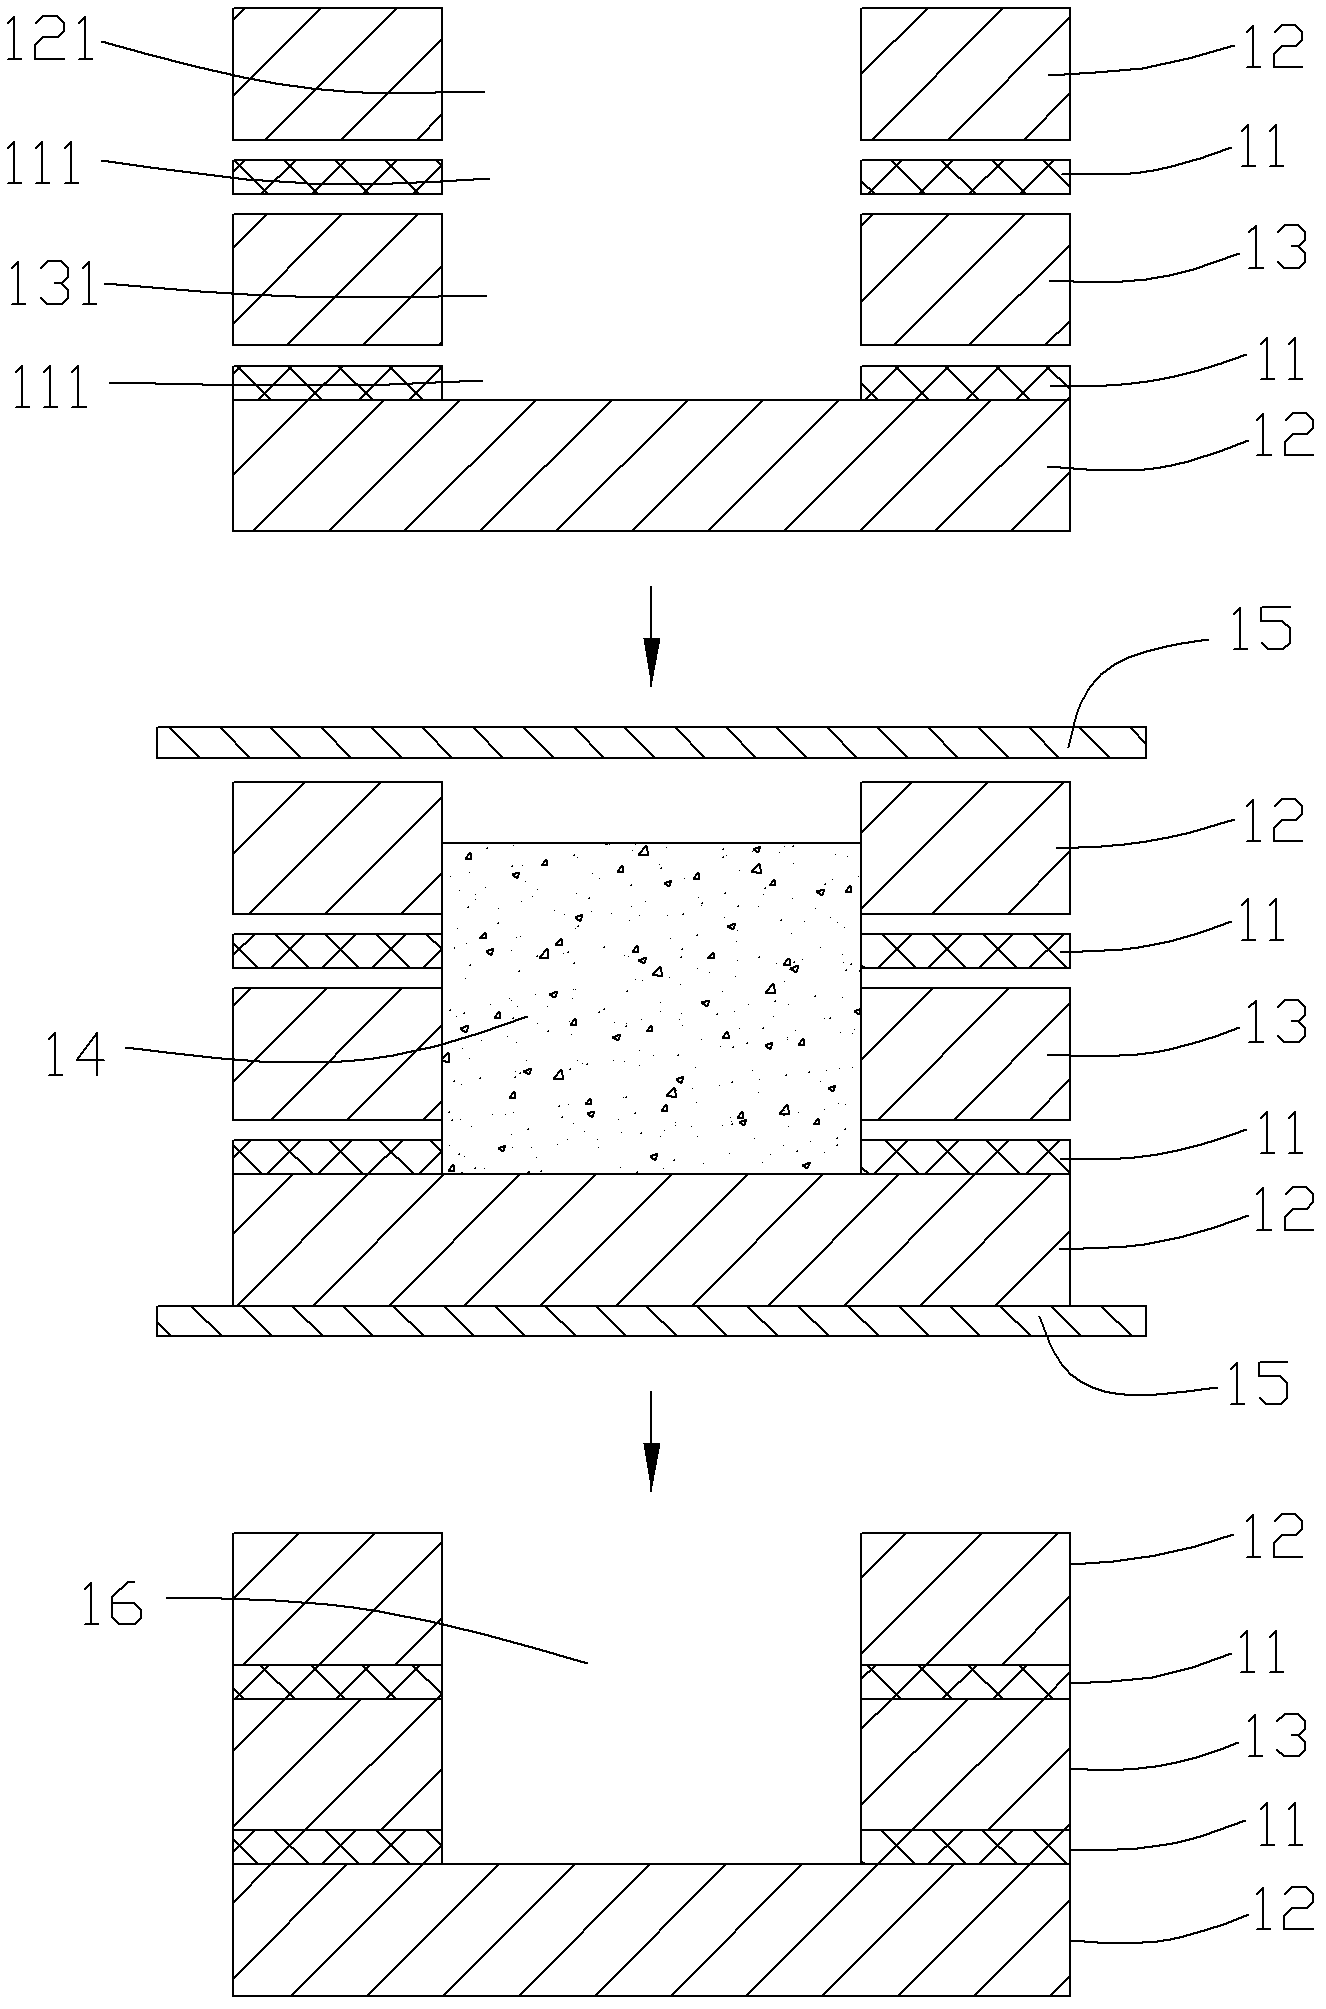 Method for manufacturing PCB (Printed Circuit Board) with stepped grooves